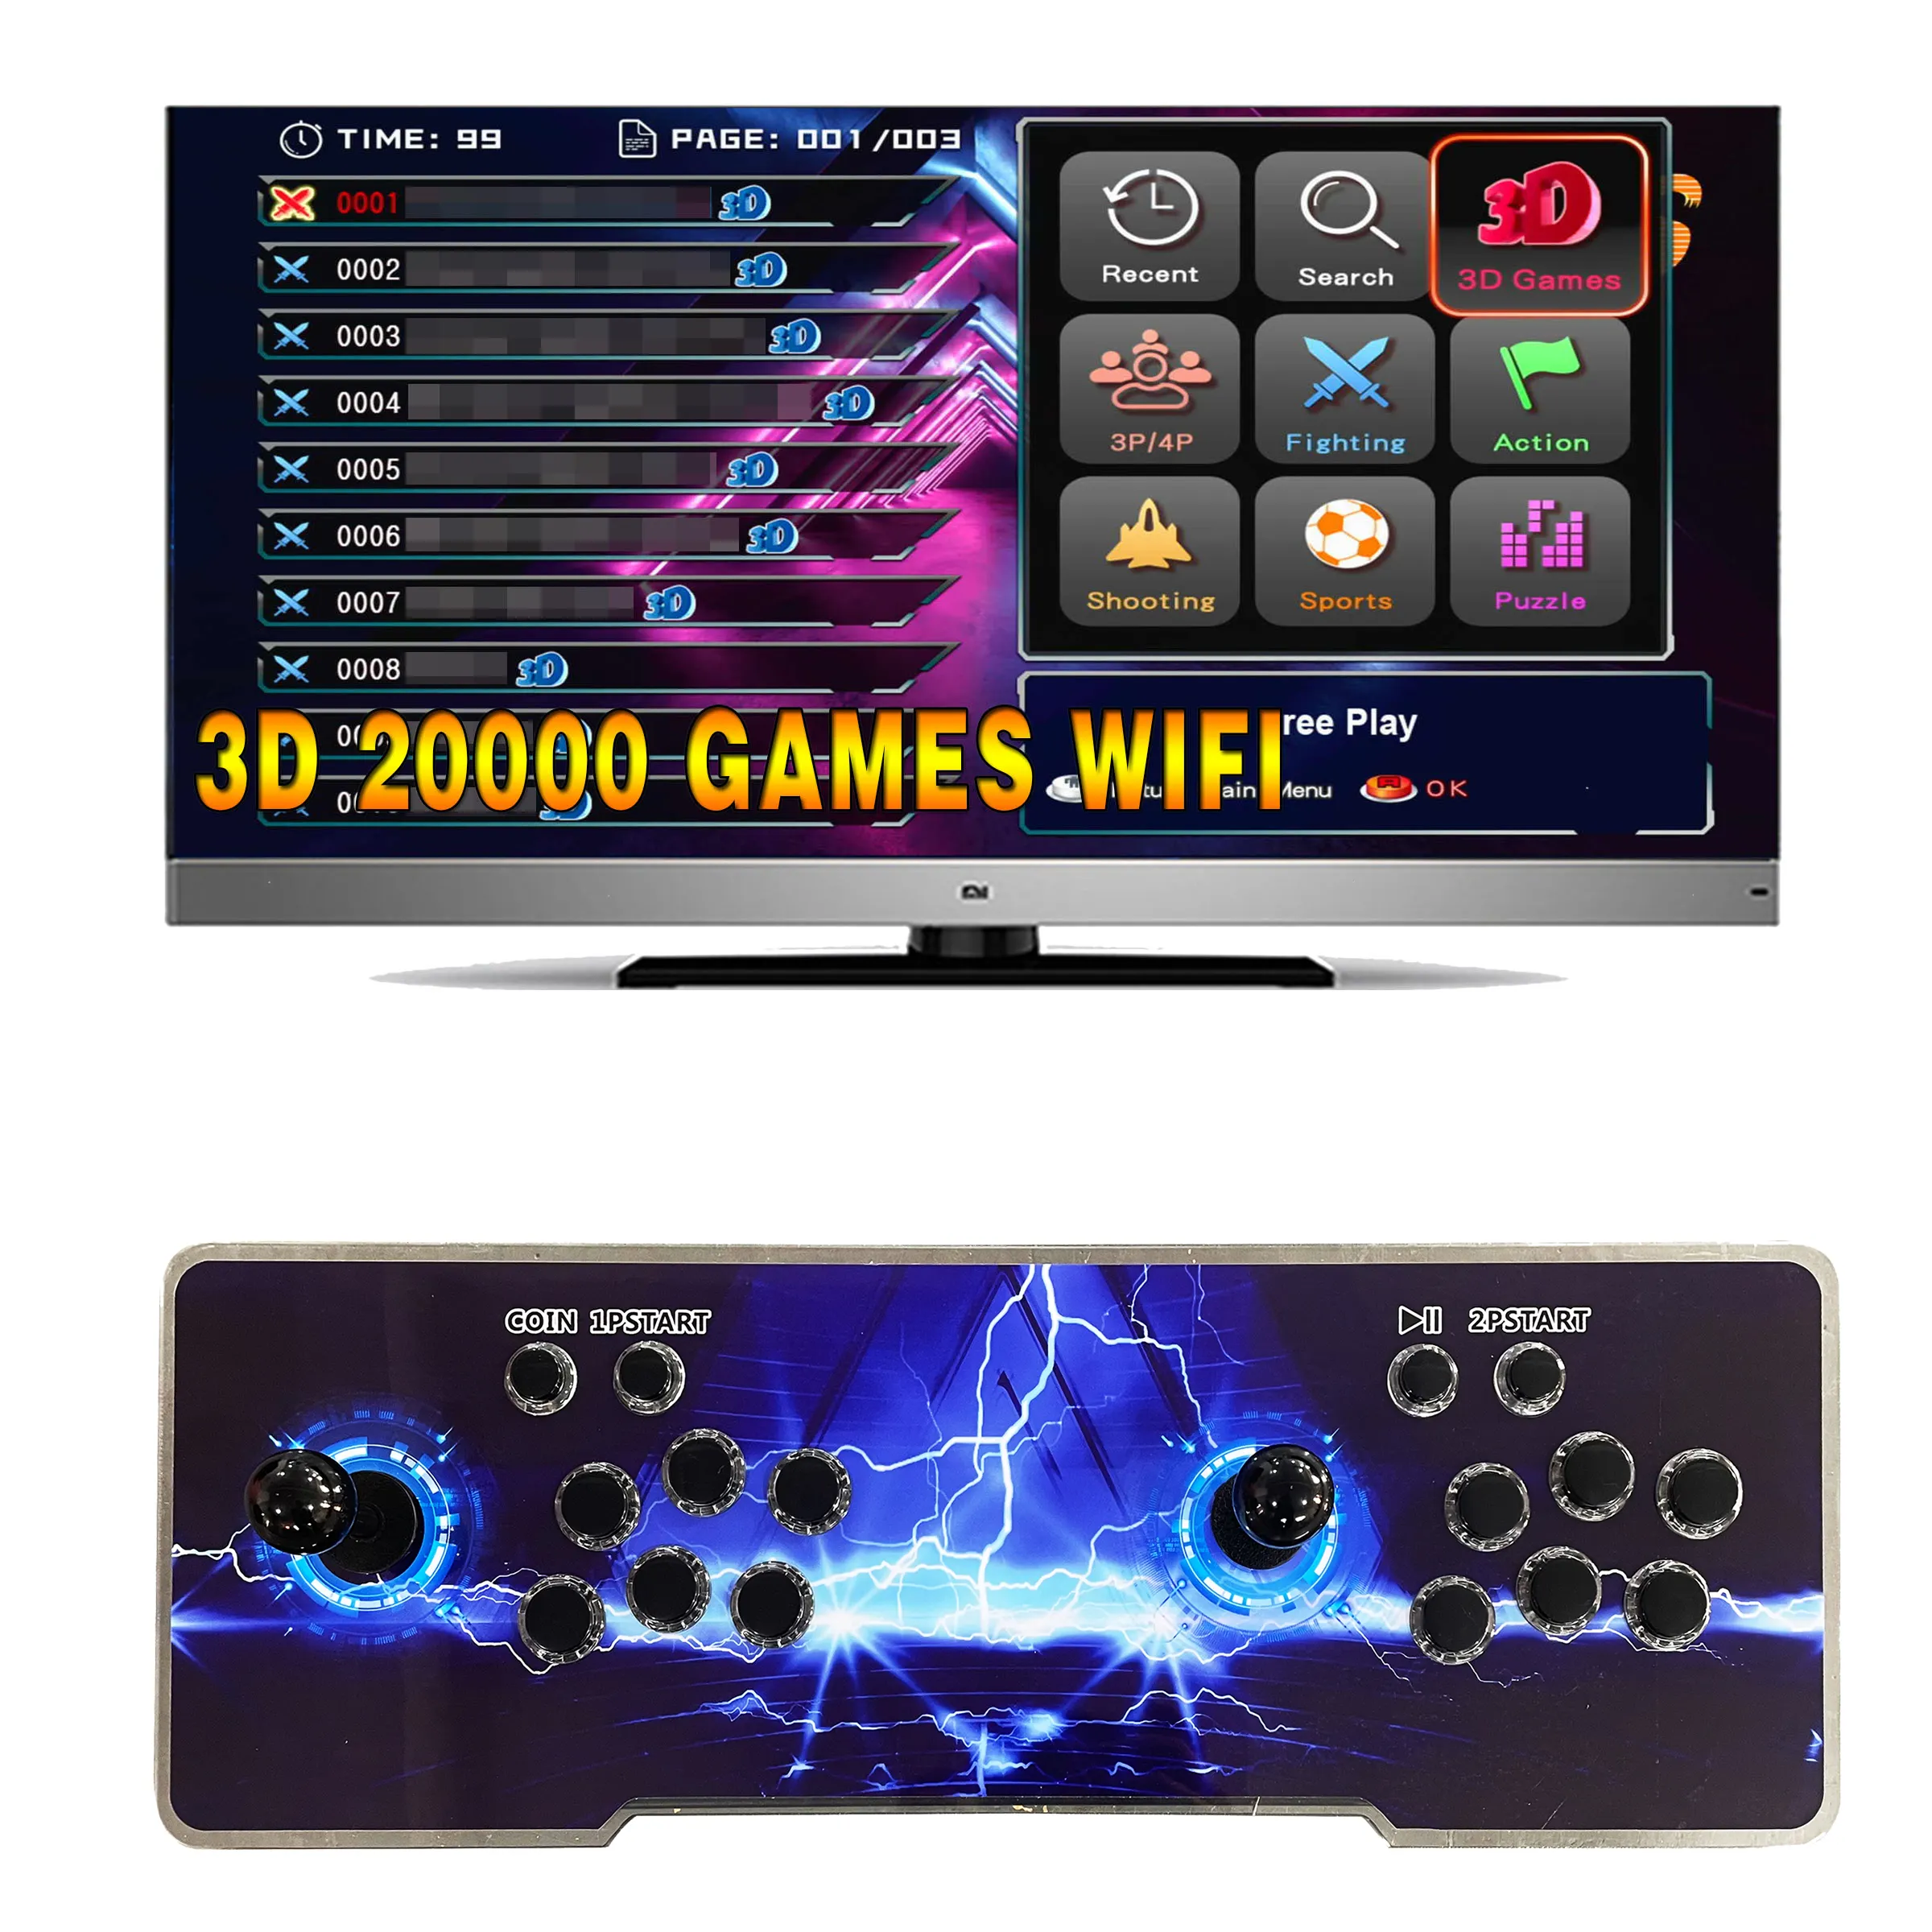 Groothandel Hd 3d Arcade Game Box 20000 In 1 Wifi Thuis Game Console 2-4 Speler Console Video Game Console